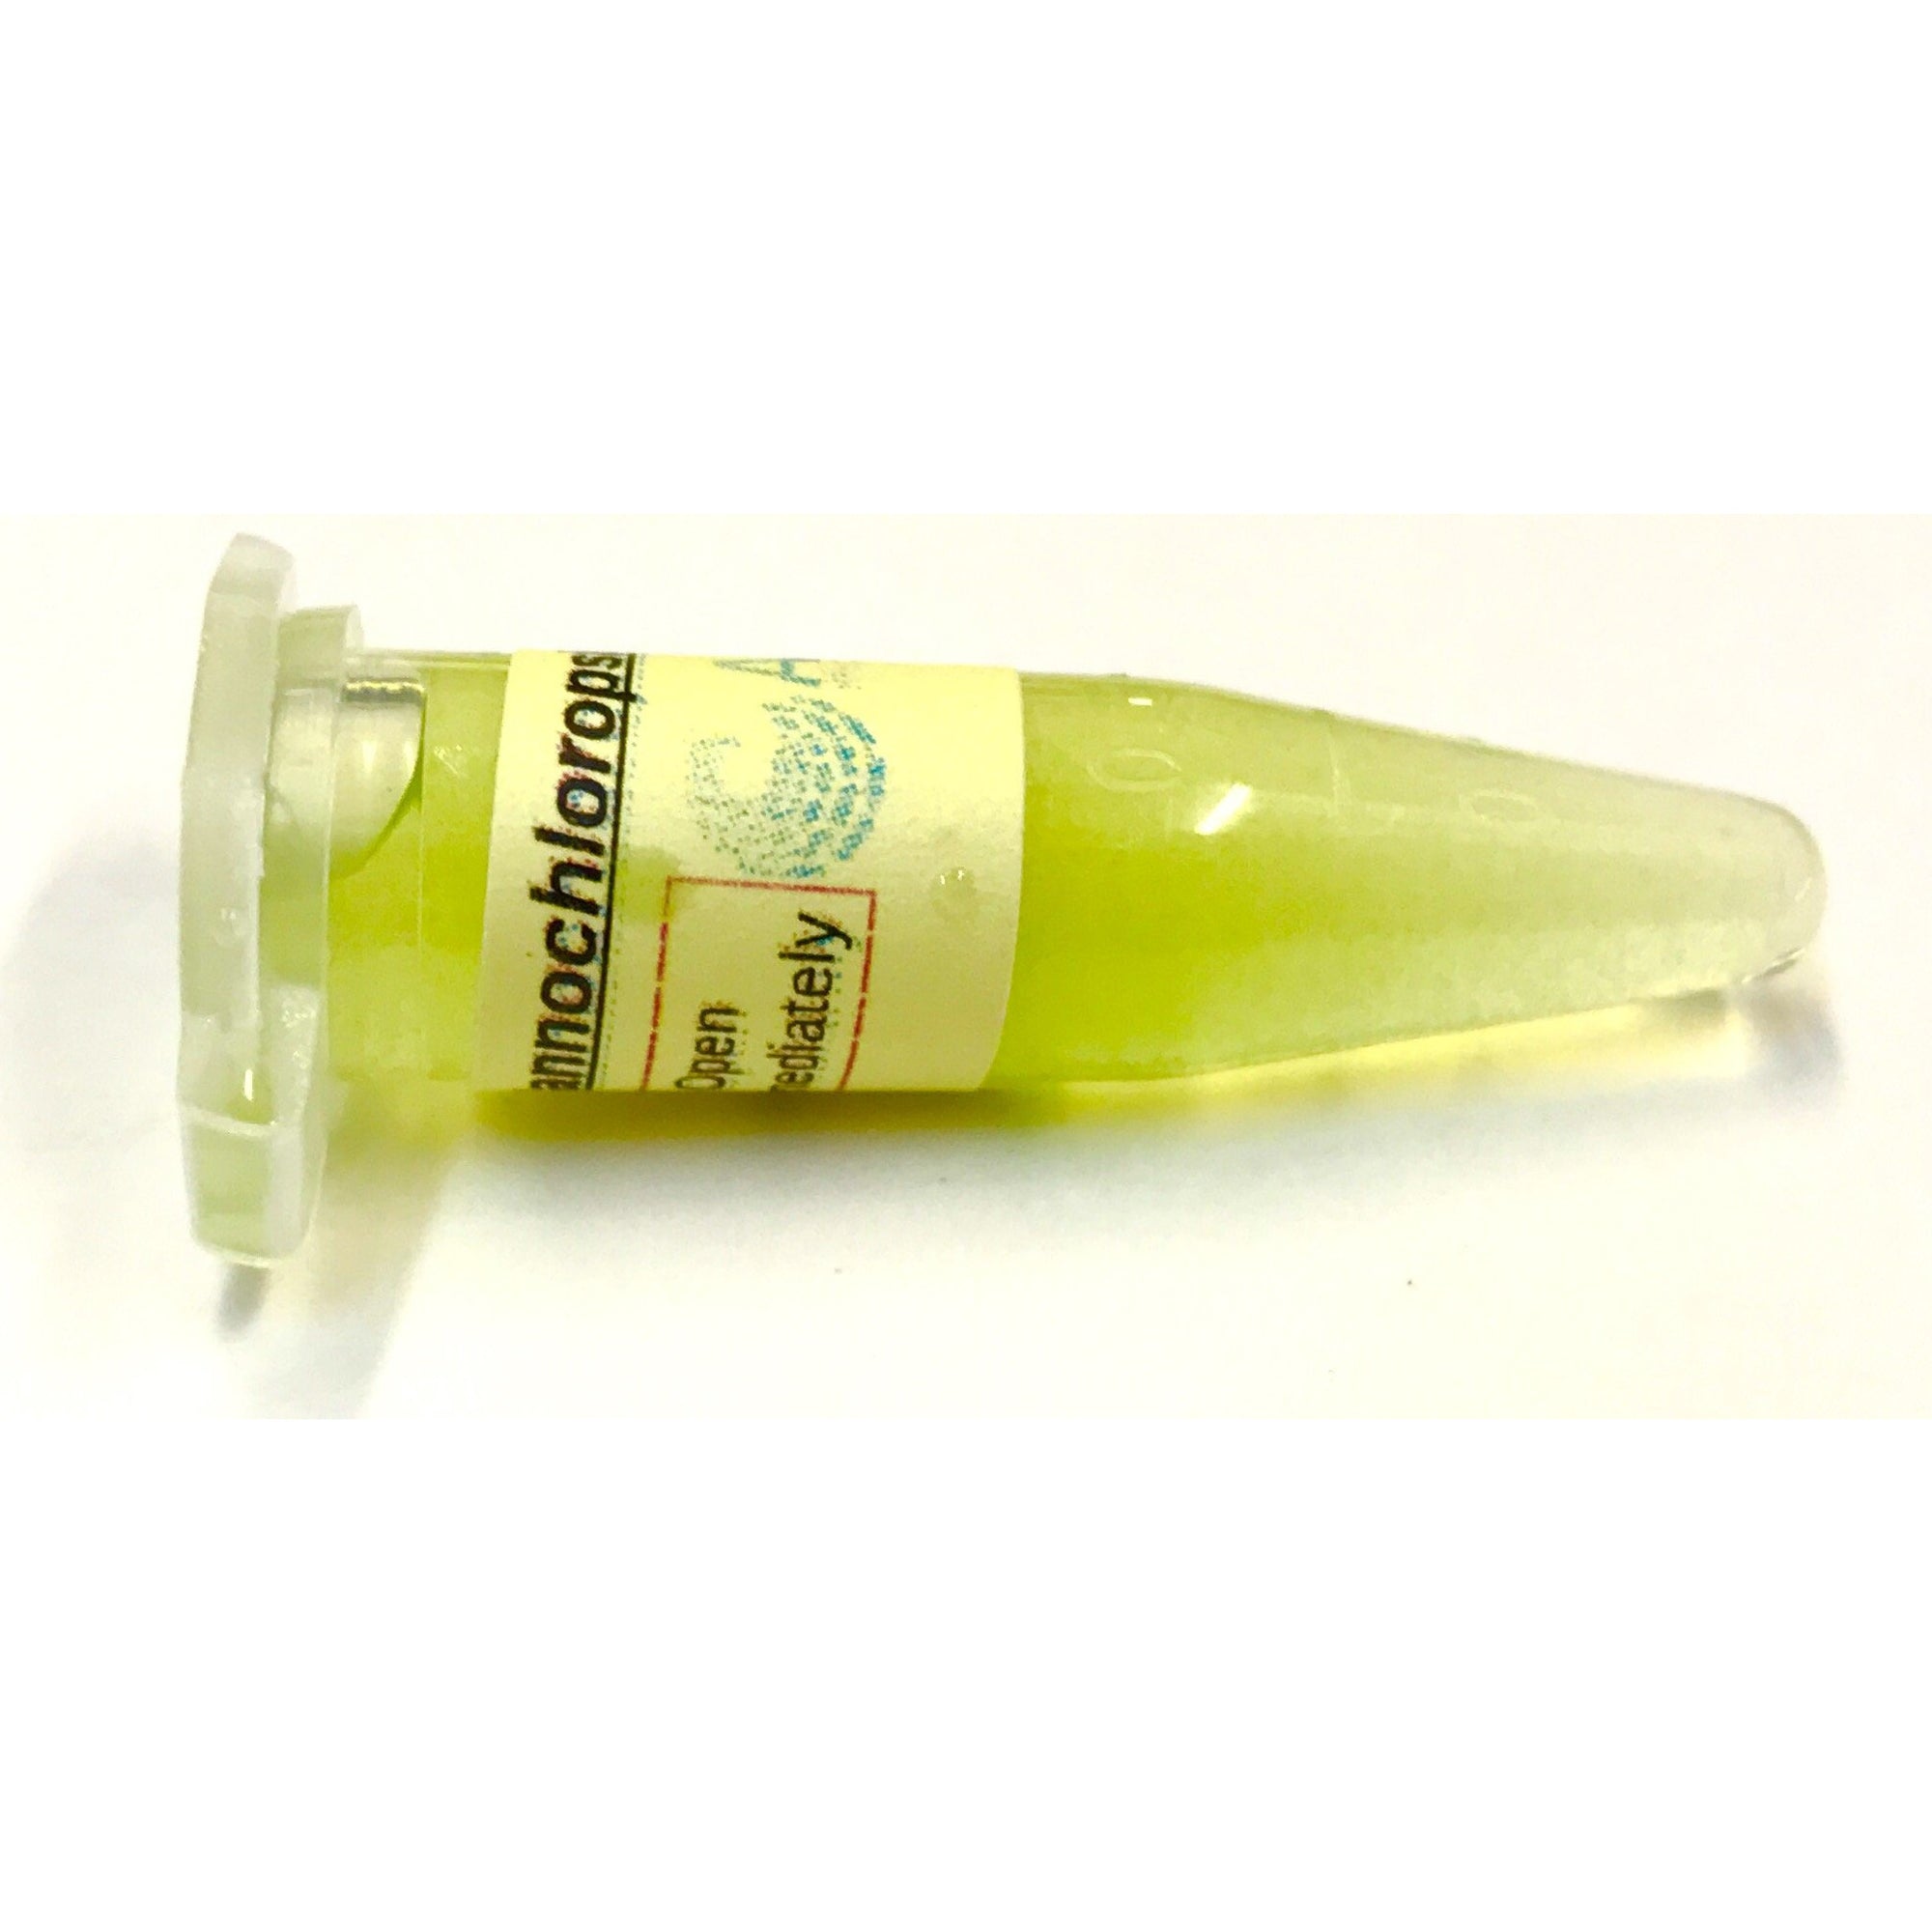 1ml snap cap vial of nanochloropsis occulata from Algae Research Supply